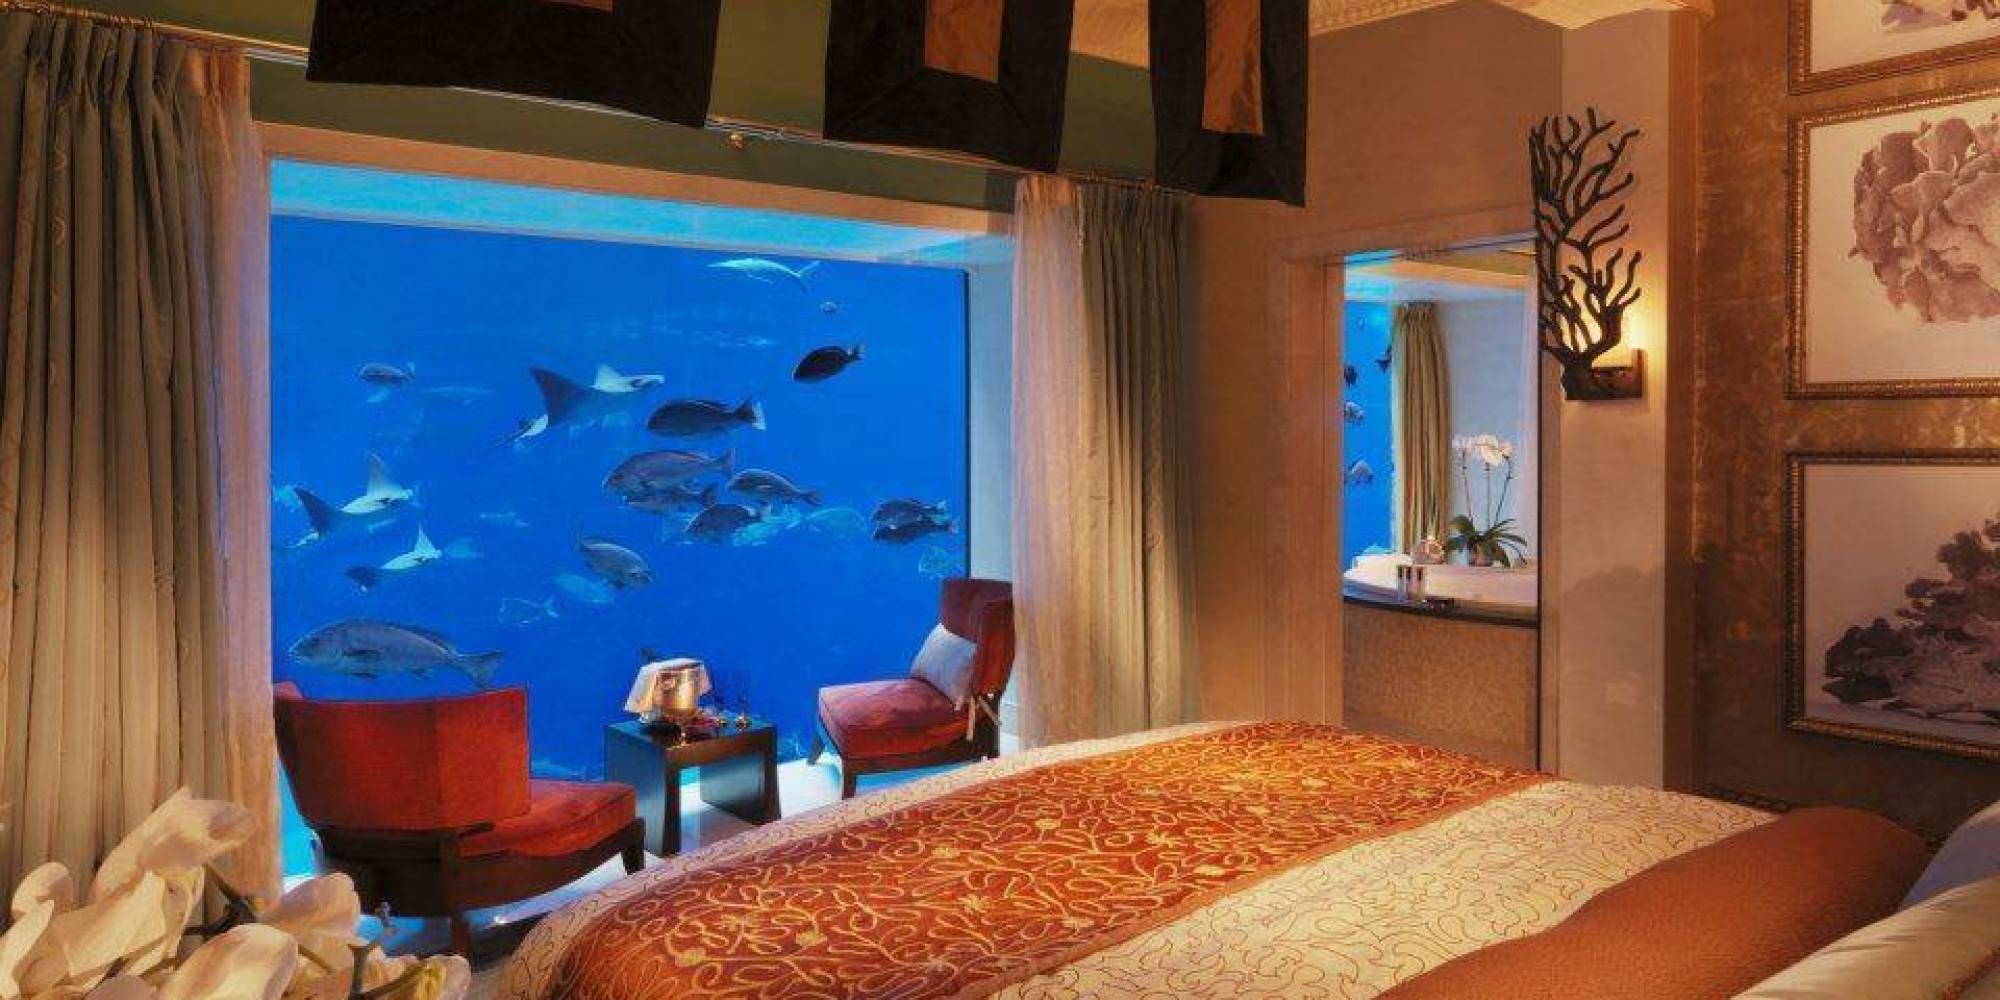 Incredible Underwater Hotel Room In Dubai Will Make You Want To Sleep